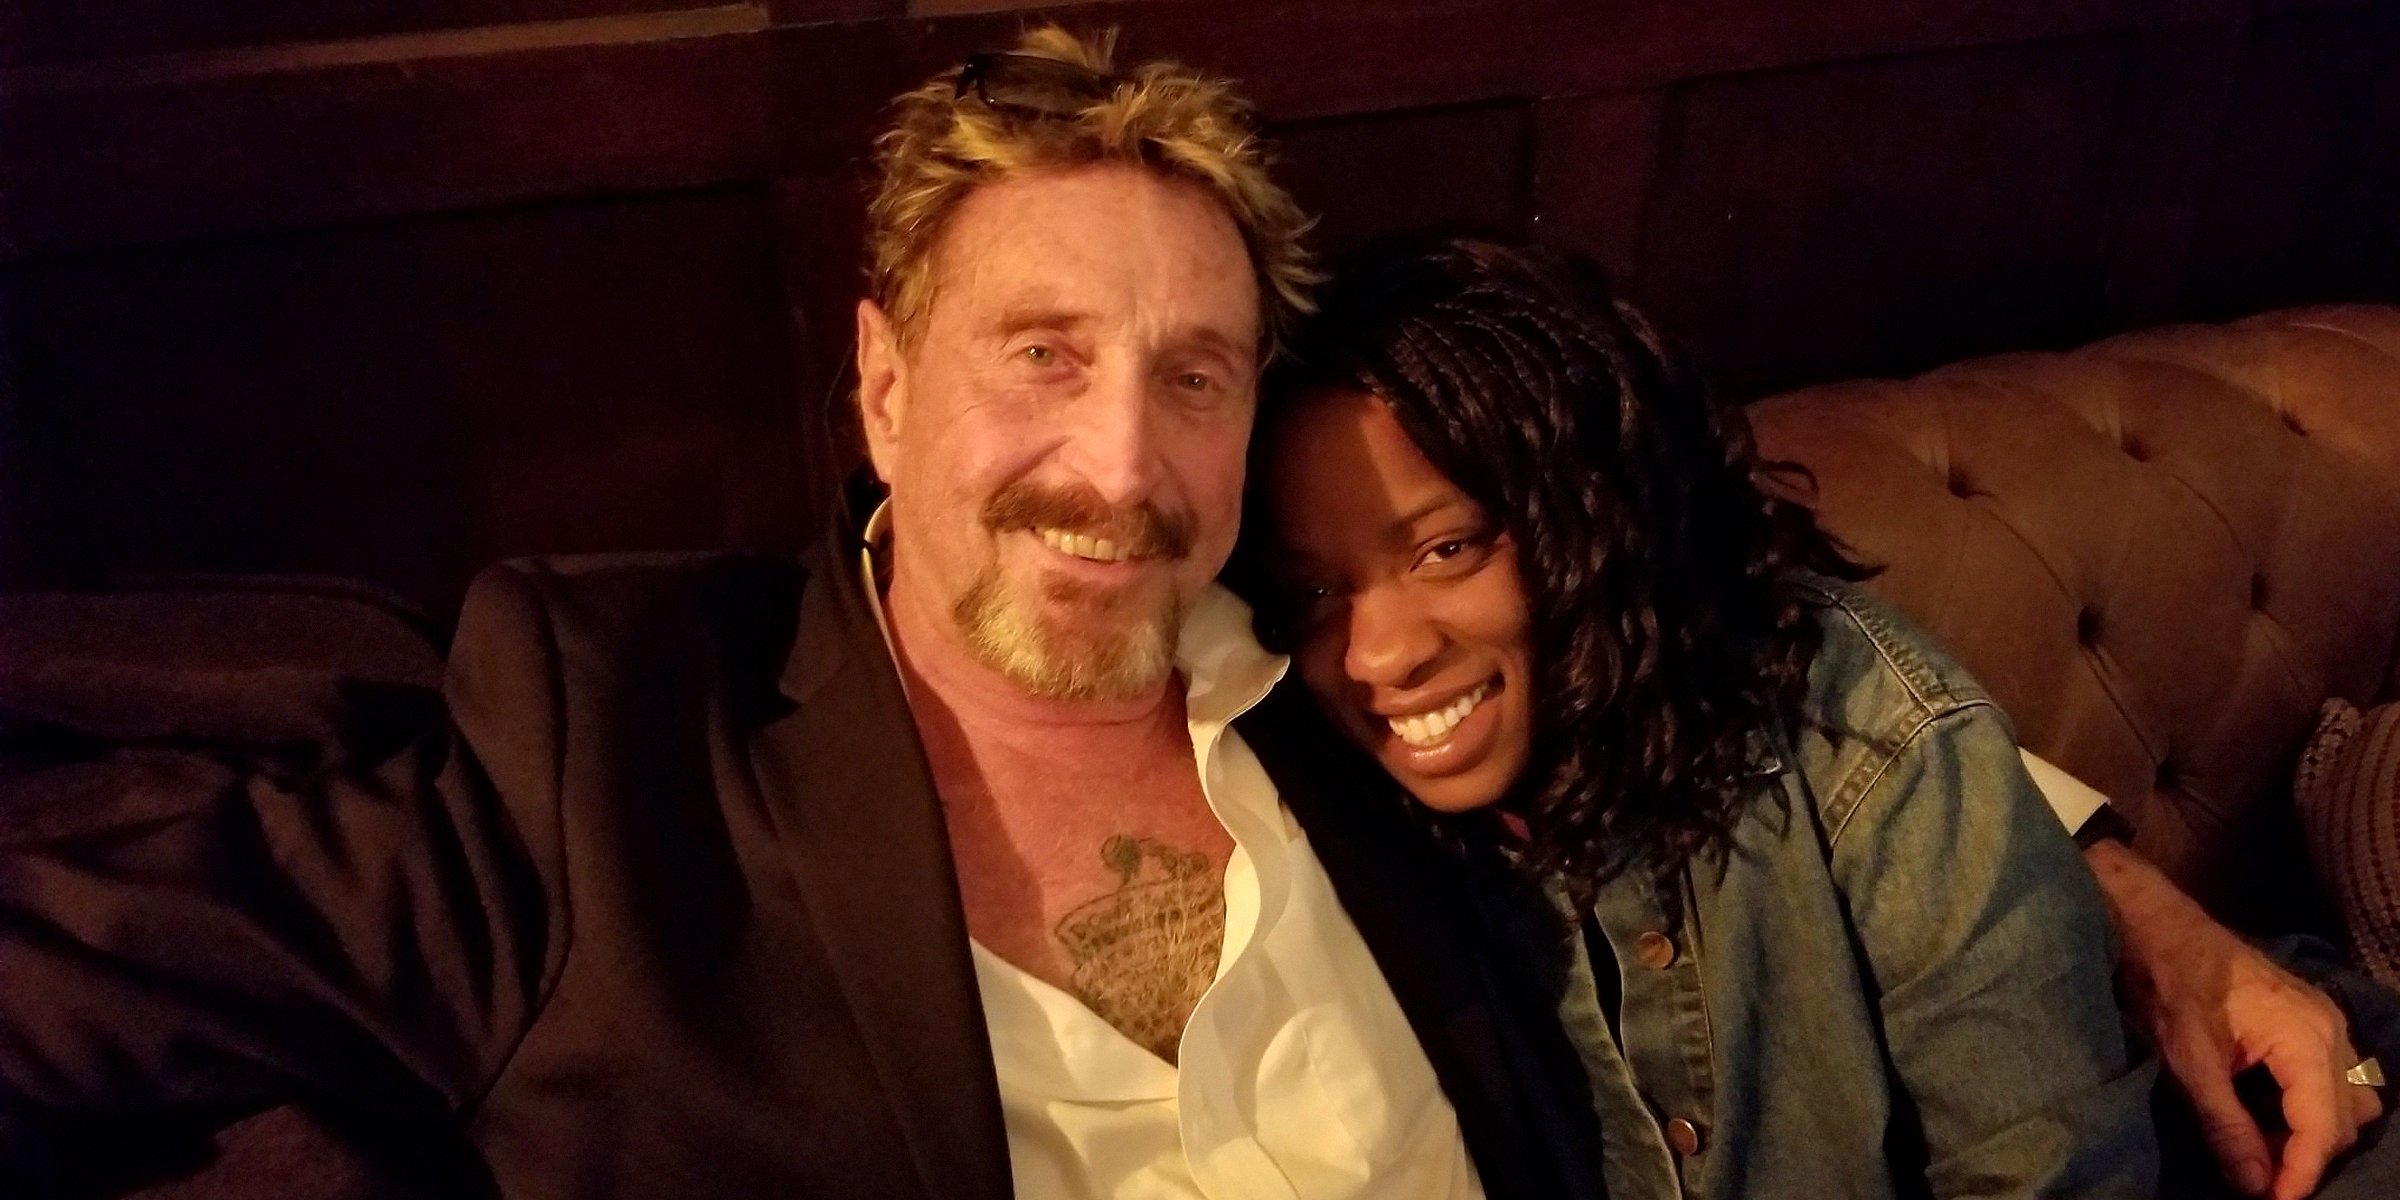 Twitter/officialmcafee